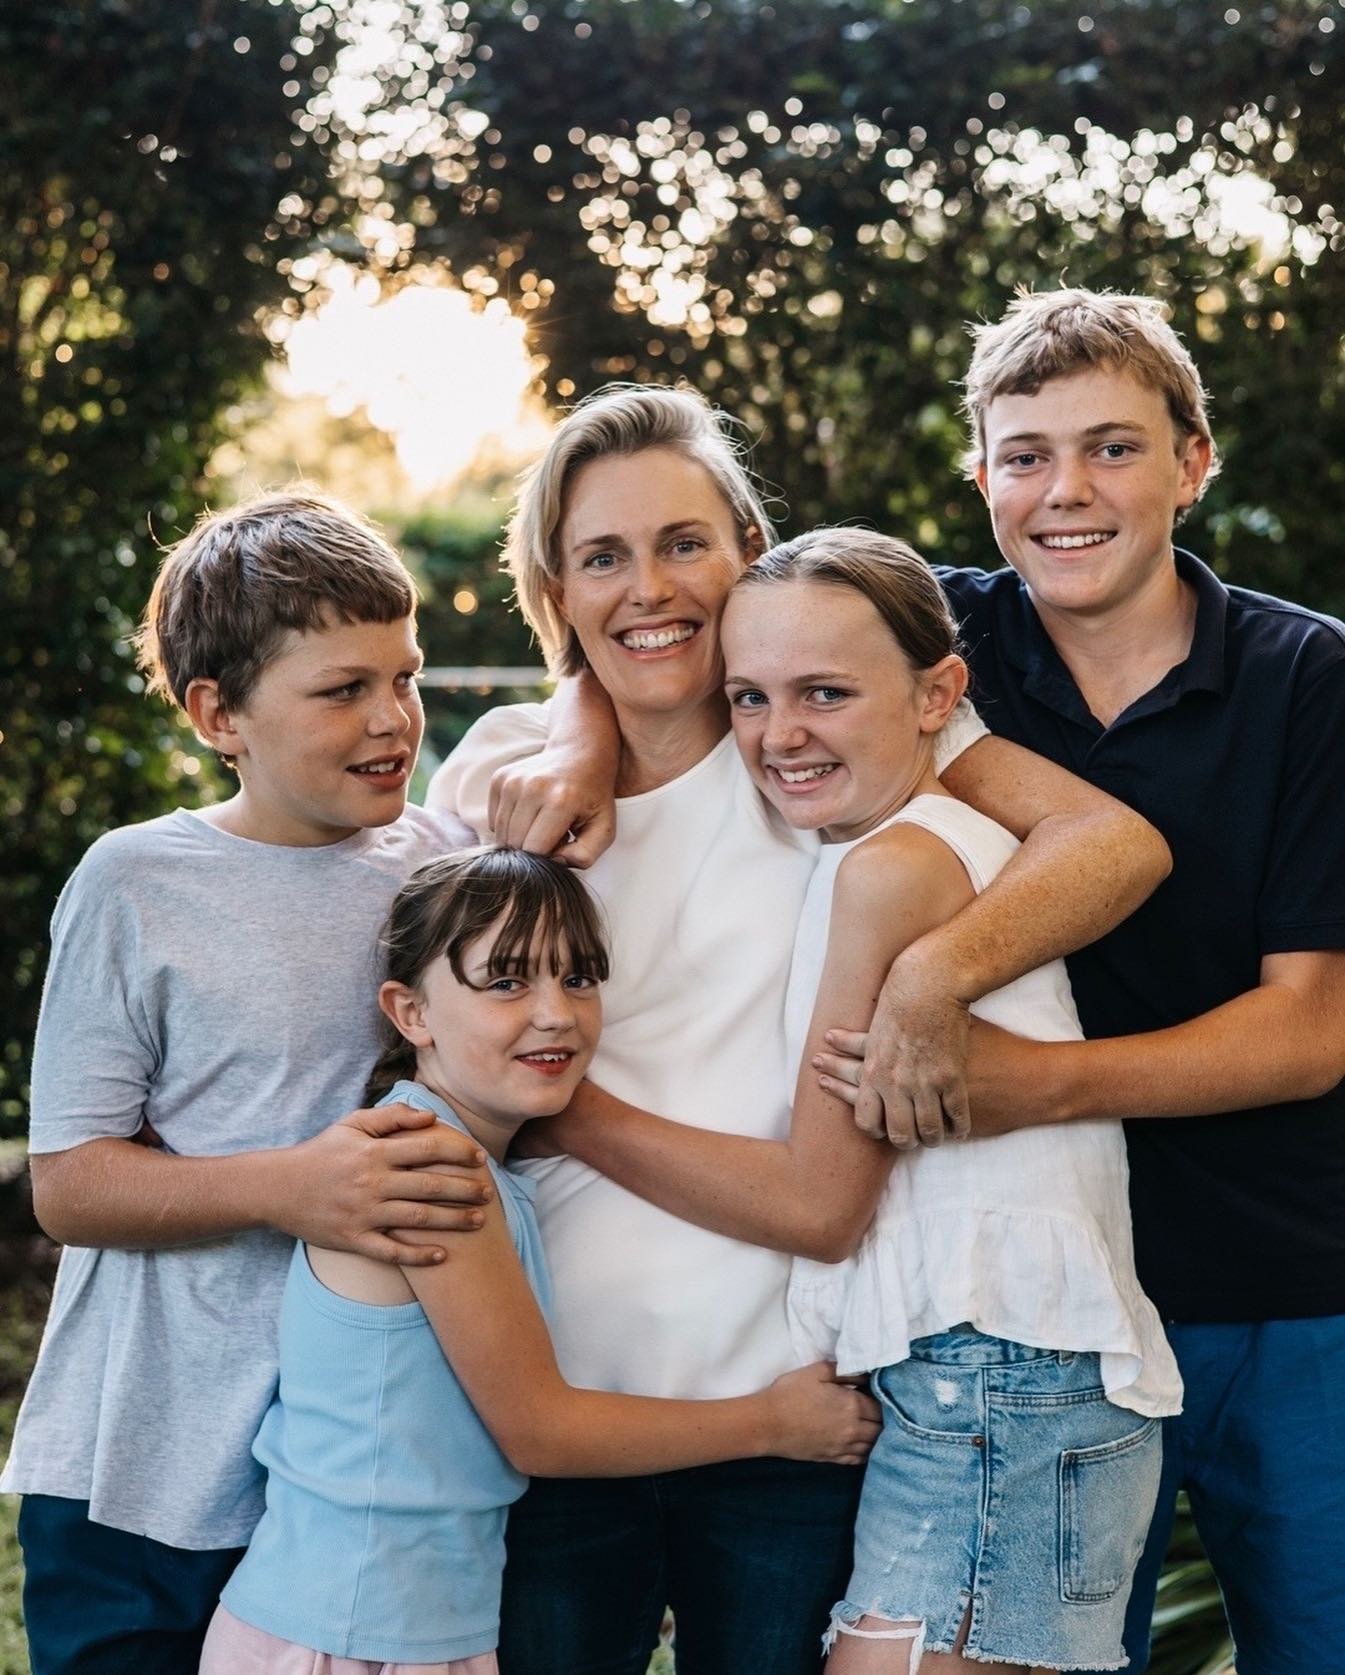 I&rsquo;m often asked when is the best time to do family photos.
⠀⠀⠀⠀⠀⠀⠀⠀⠀
I always say NOW is a perfect time - because it&rsquo;s better than a time that&rsquo;s too late.
⠀⠀⠀⠀⠀⠀⠀⠀⠀
Don&rsquo;t regret not doing the photos.
⠀⠀⠀⠀⠀⠀⠀⠀⠀
⠀⠀⠀⠀⠀⠀⠀⠀⠀
⠀⠀⠀⠀⠀⠀